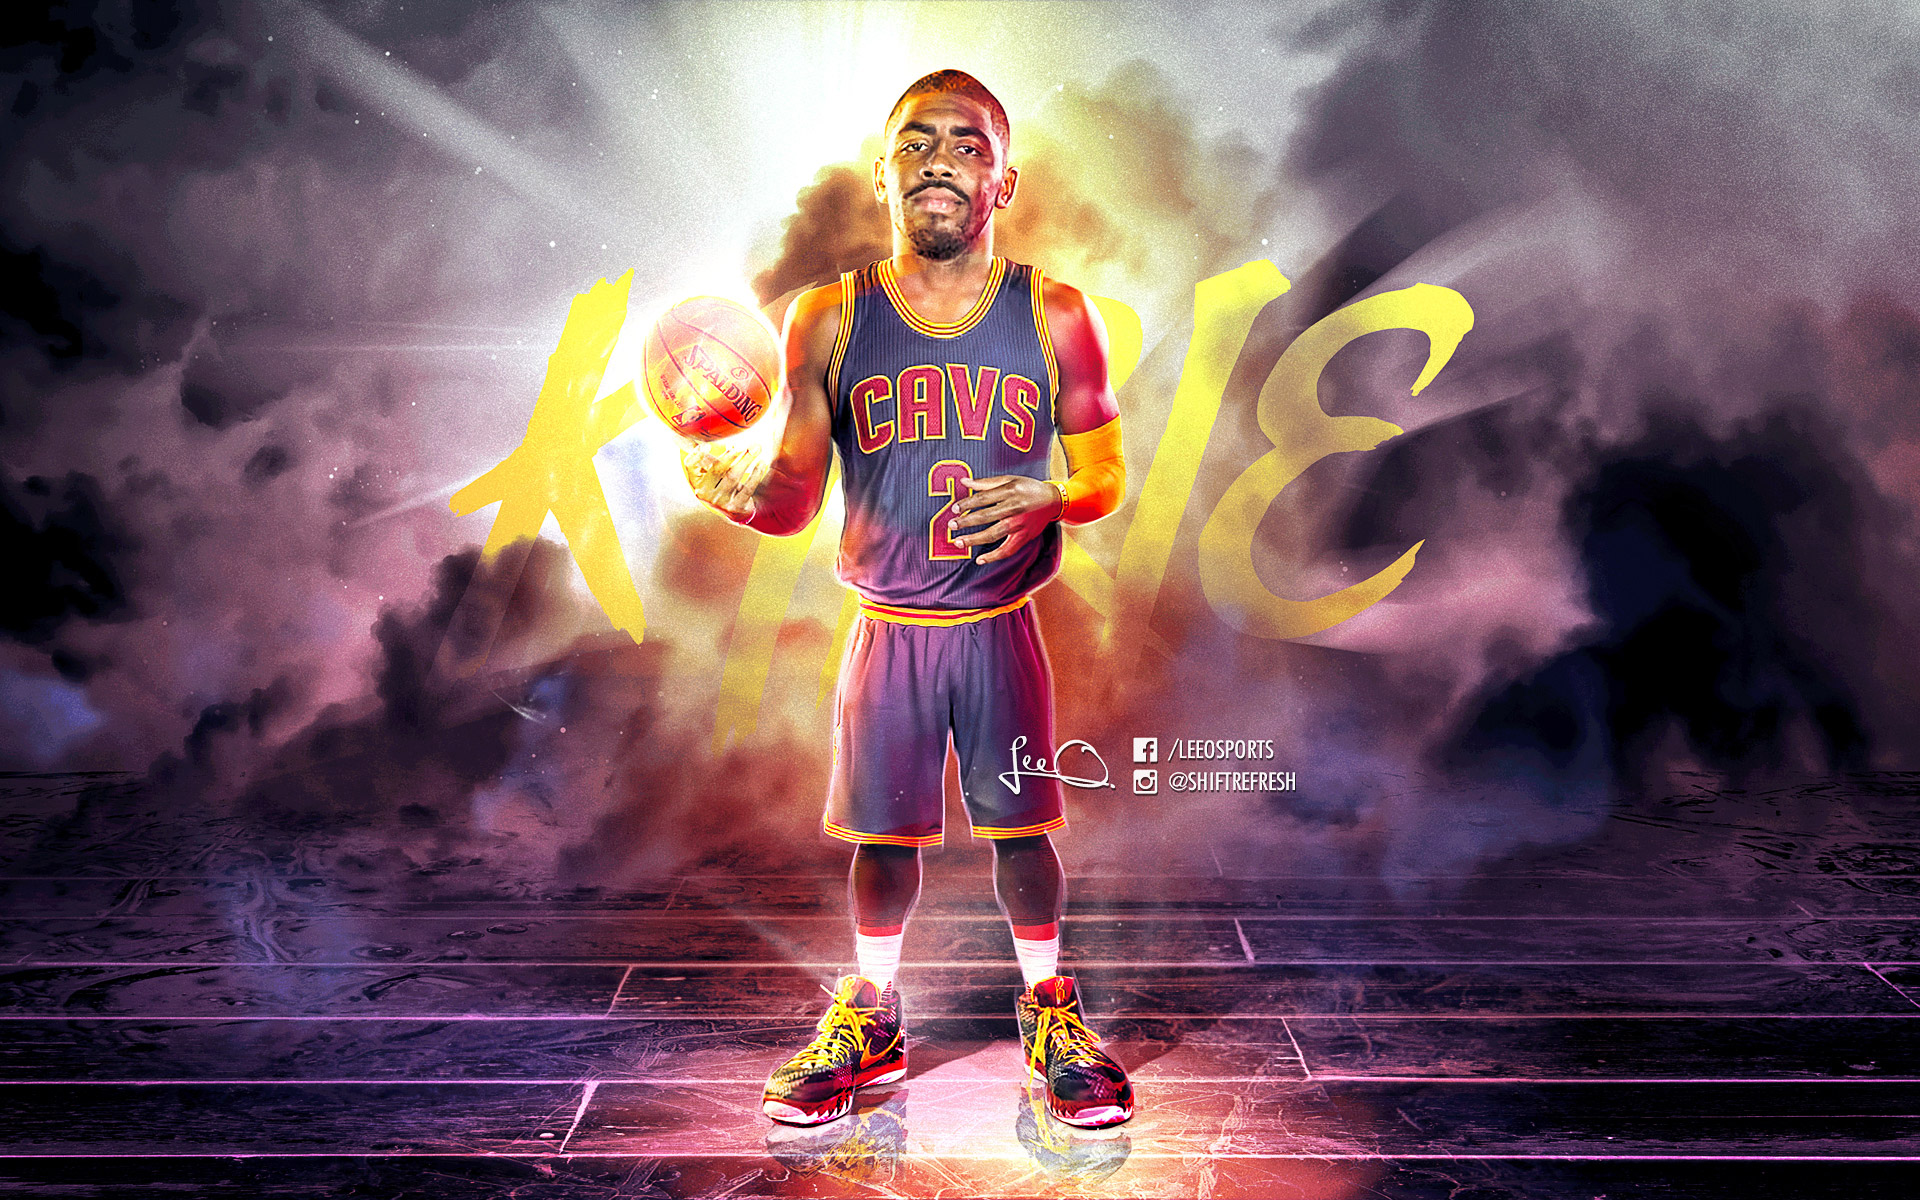 kyrie irving cool wallpaper,basketball player,graphic design,football player,graphics